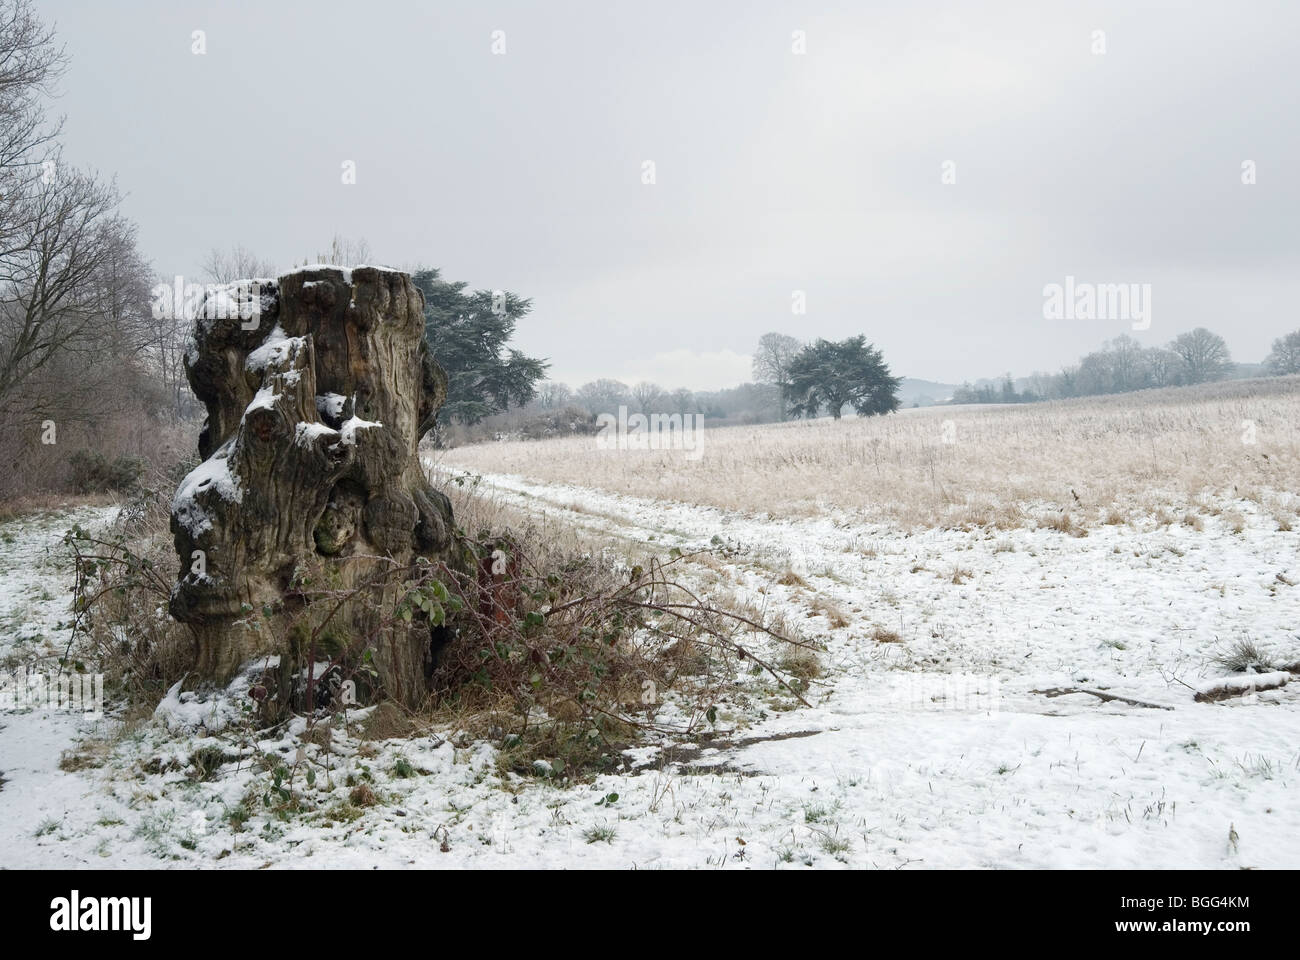 Scenic landscape of farmland in Hampshire with large old tree stump surround by snow Stock Photo